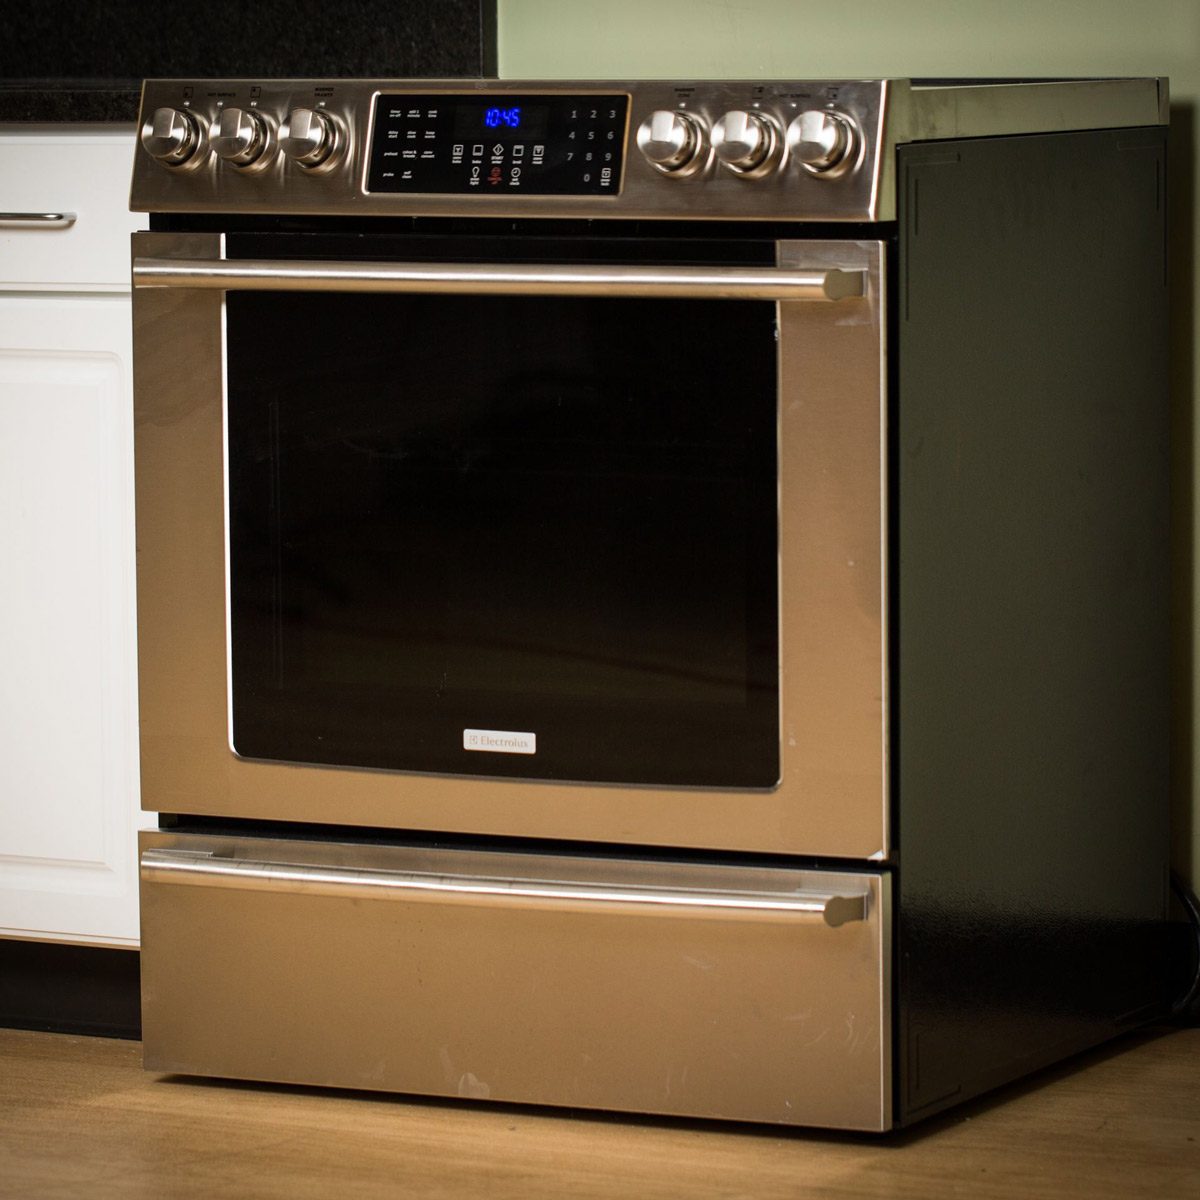 electroluxelectricoven_12 smart oven